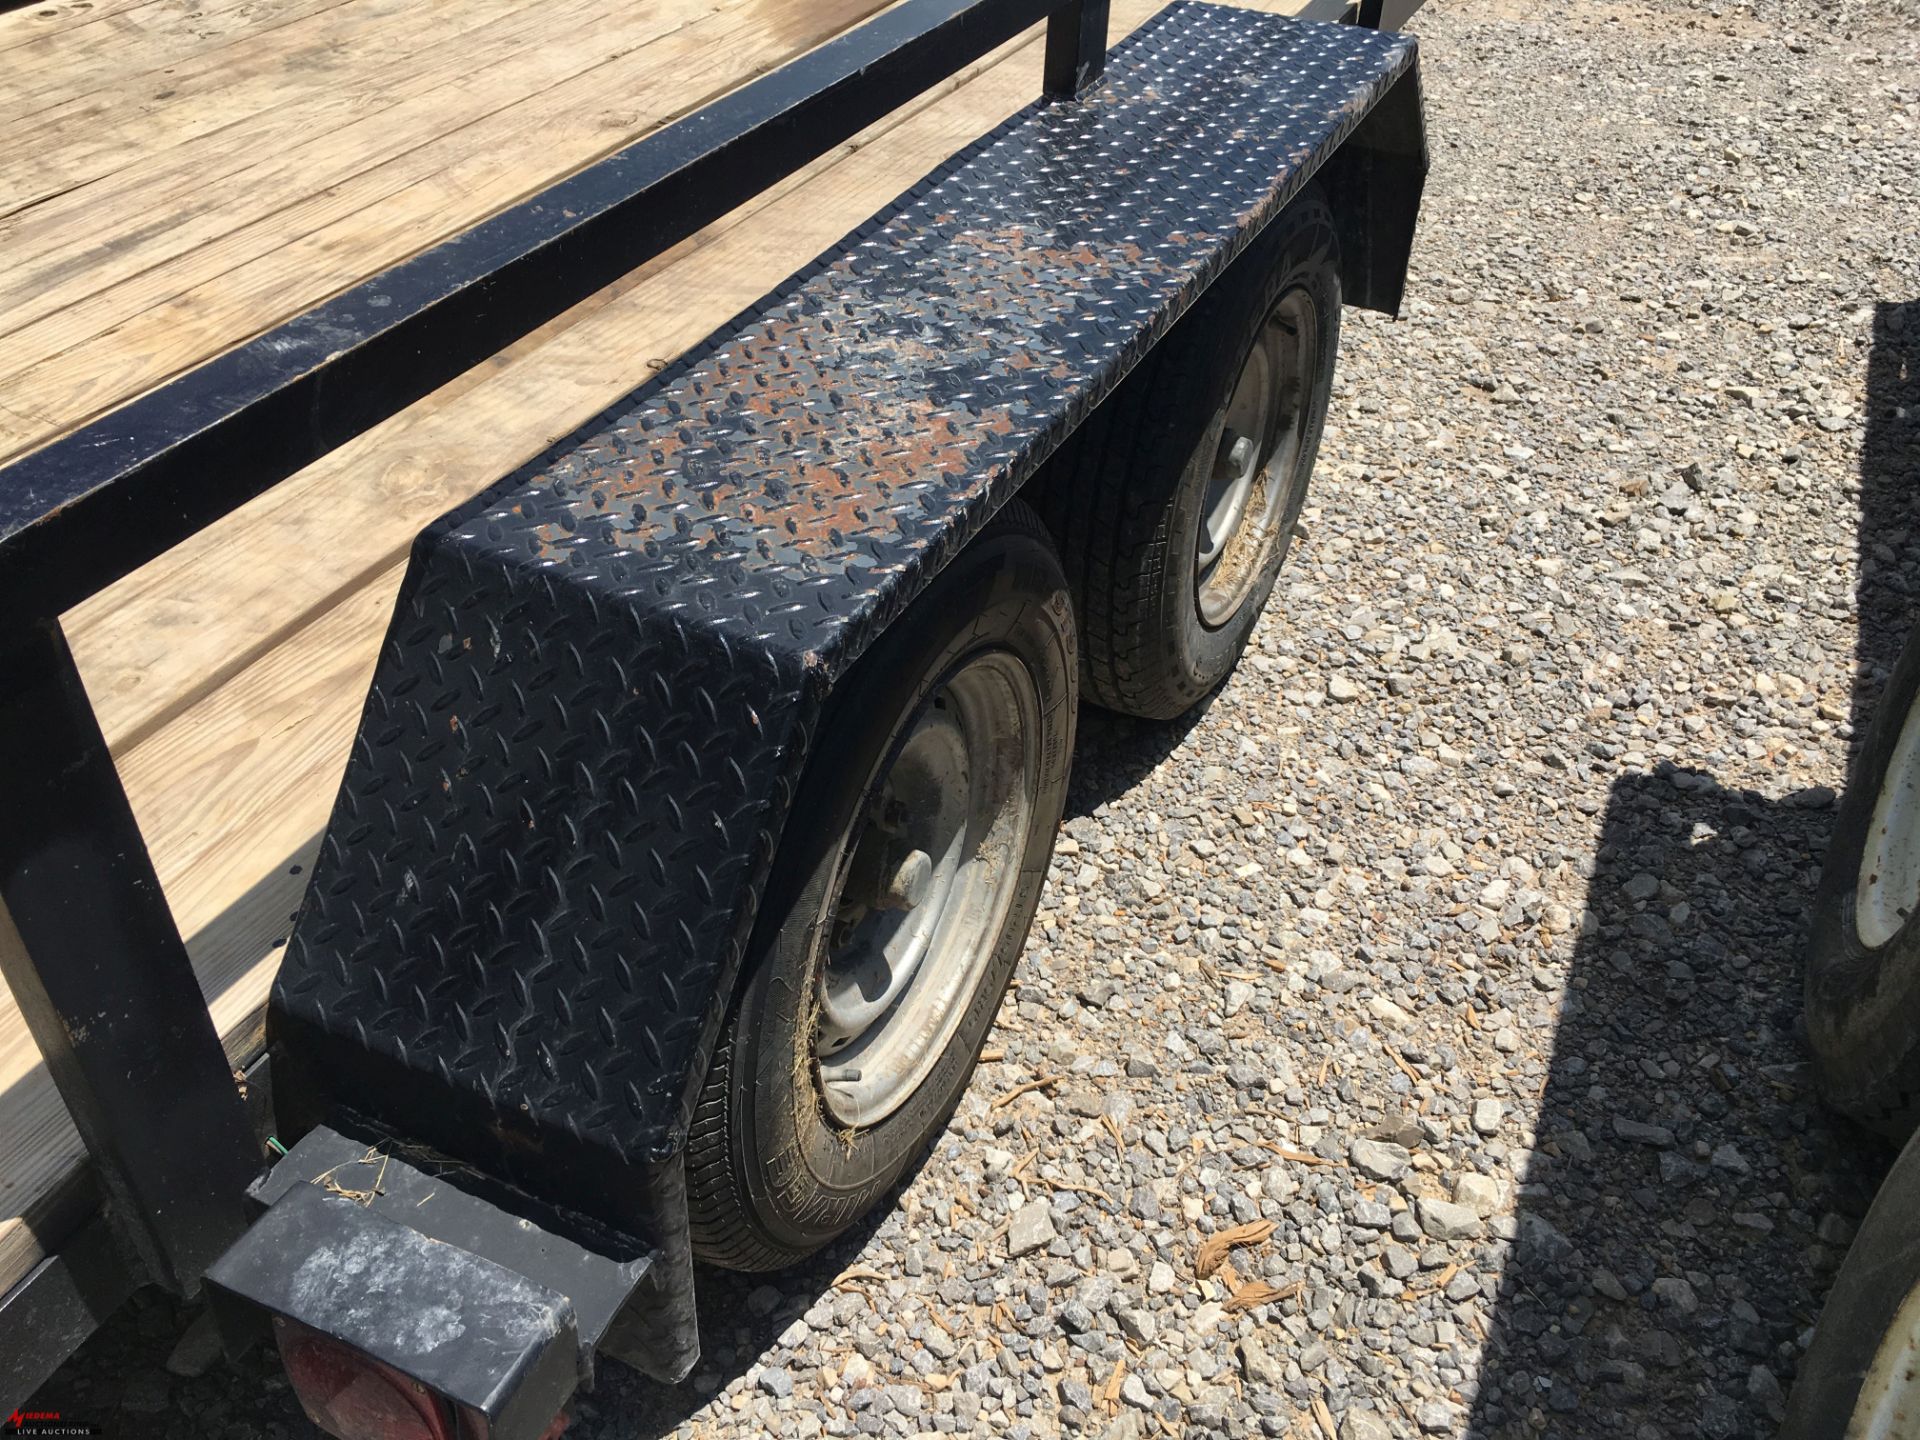 16' TRAILER, WITH WOOD DECK, FOLD DOWN RAMPS, CUSTOM BUILT BY FARM, DOES NOT SELL WITH - Image 5 of 7